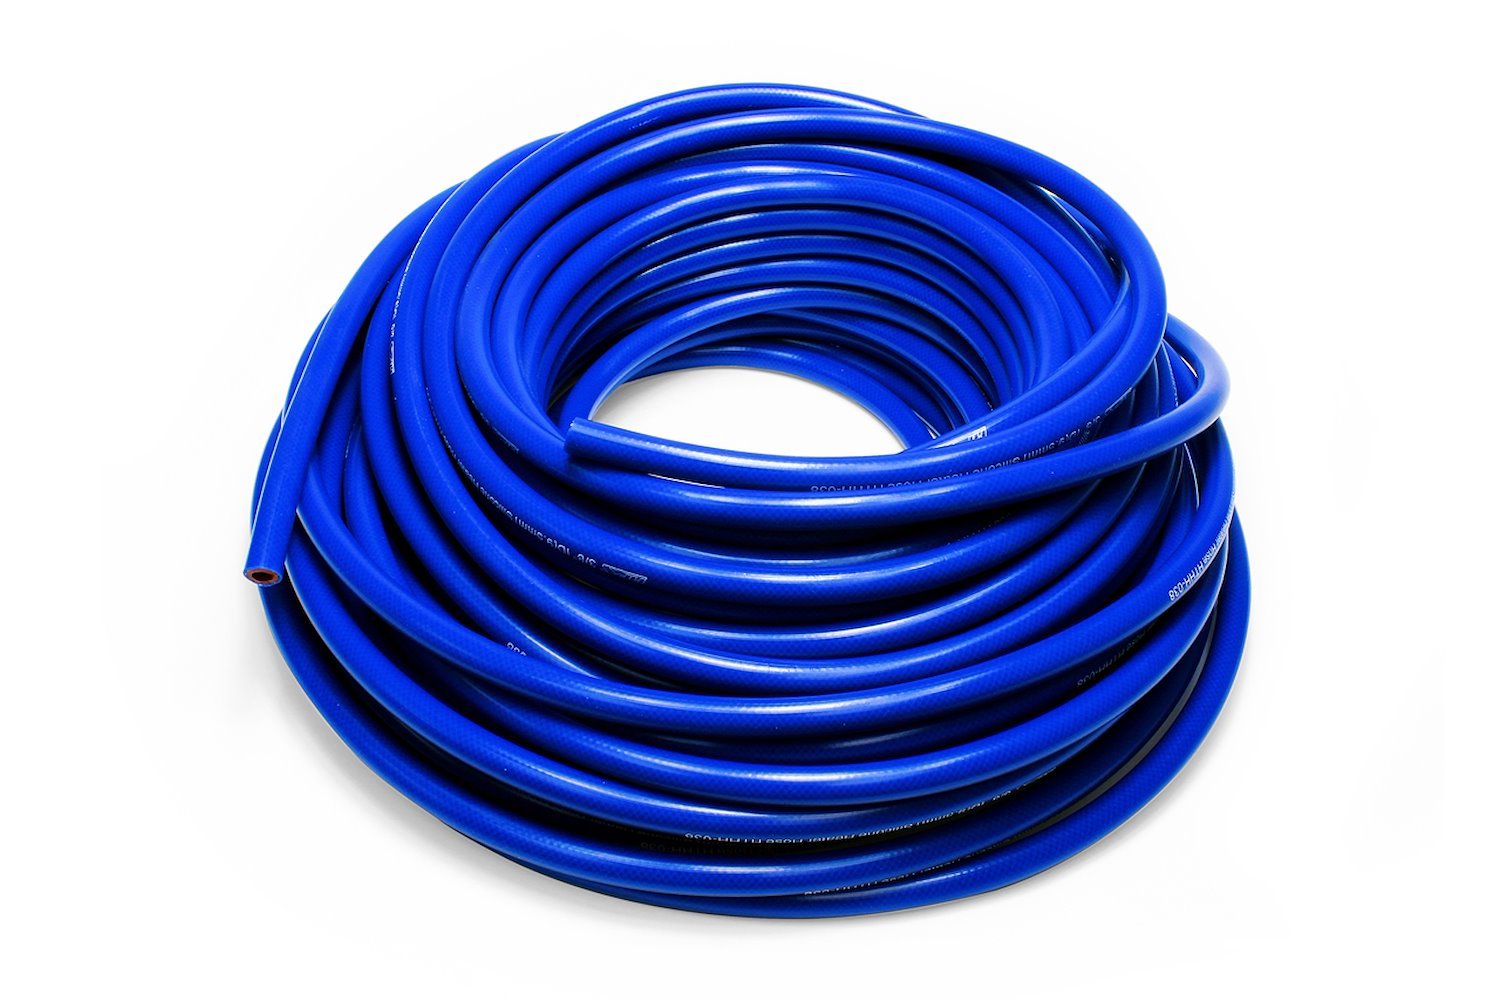 HTHH-087-BLUEx100 Silicone Heater Hose Tubing, High-Temp Reinforced, 7/8 in. ID, 100 ft. Roll, Blue